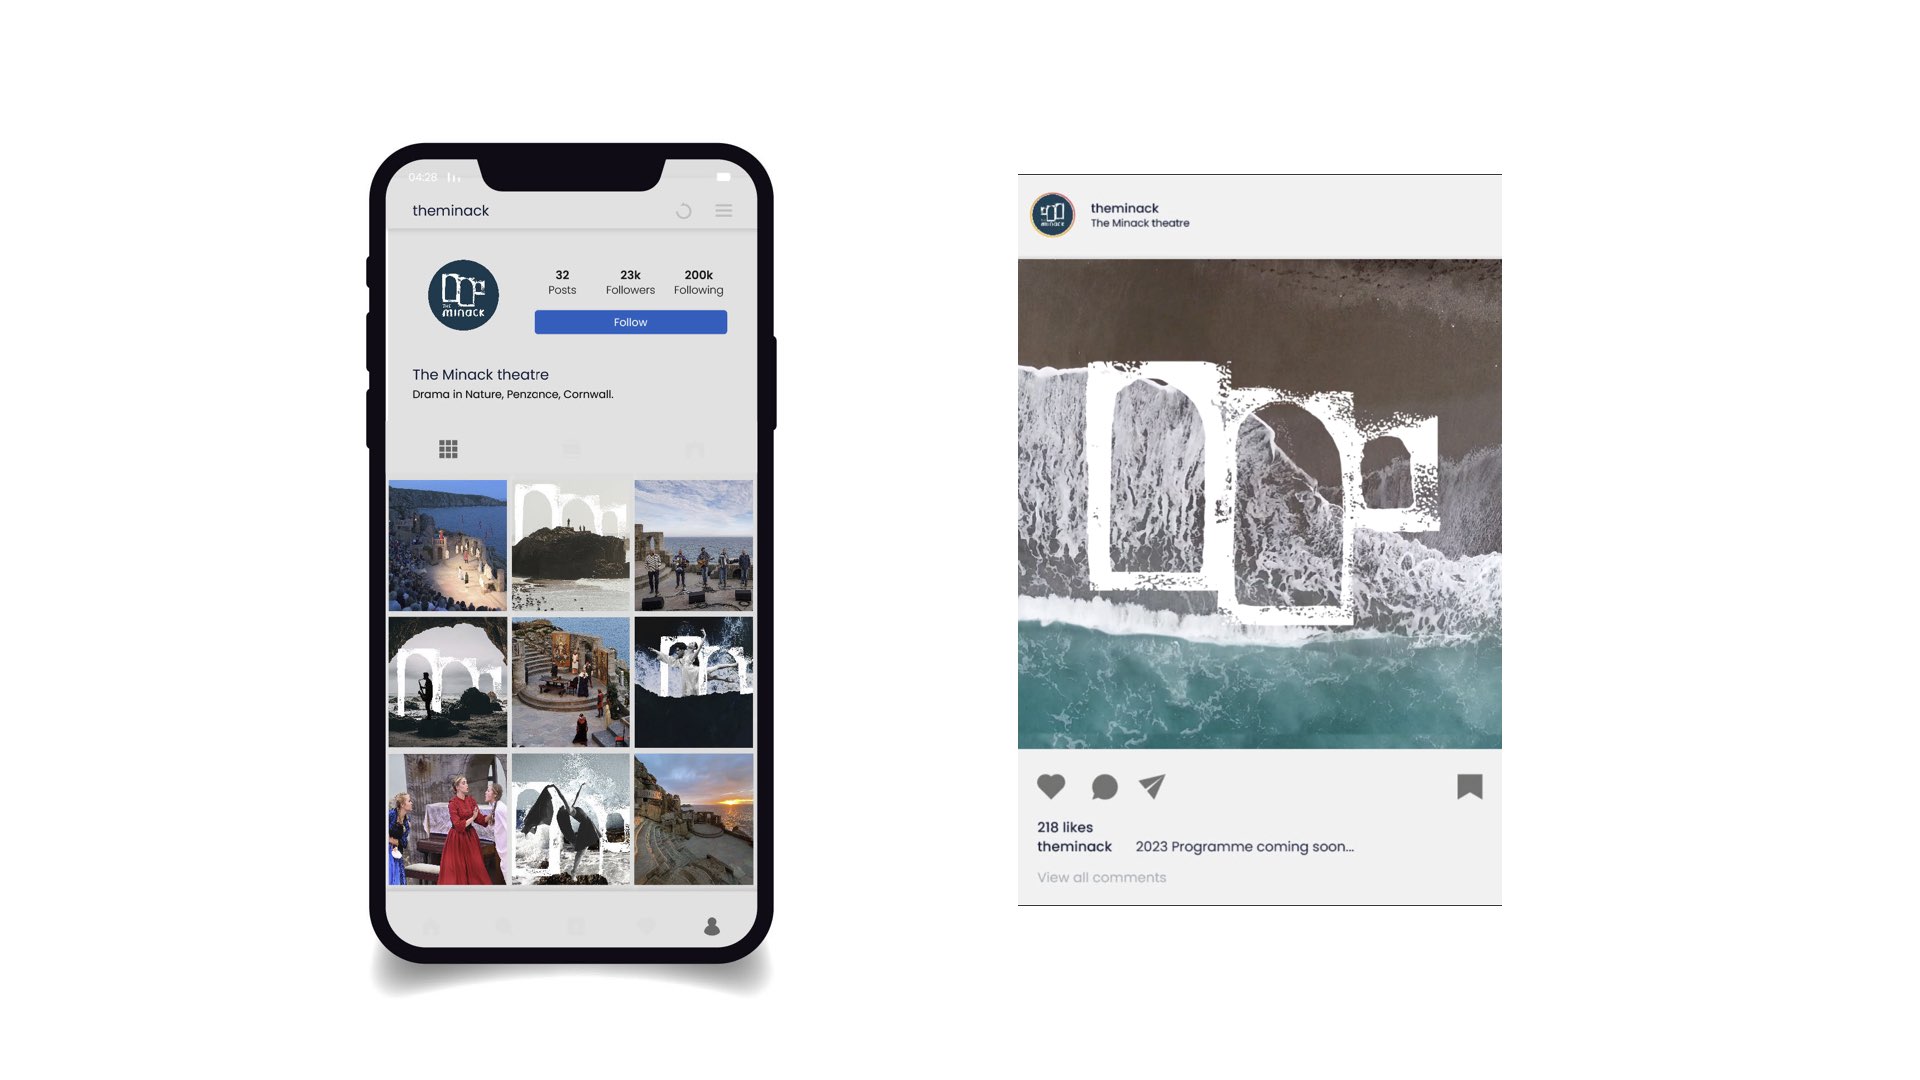 Instagram utilising the arches logo with Cornish coast imagery and acts performing. There is also an animated GIF instagram post which shows a wave covering the logo. By Emily Blaxill.